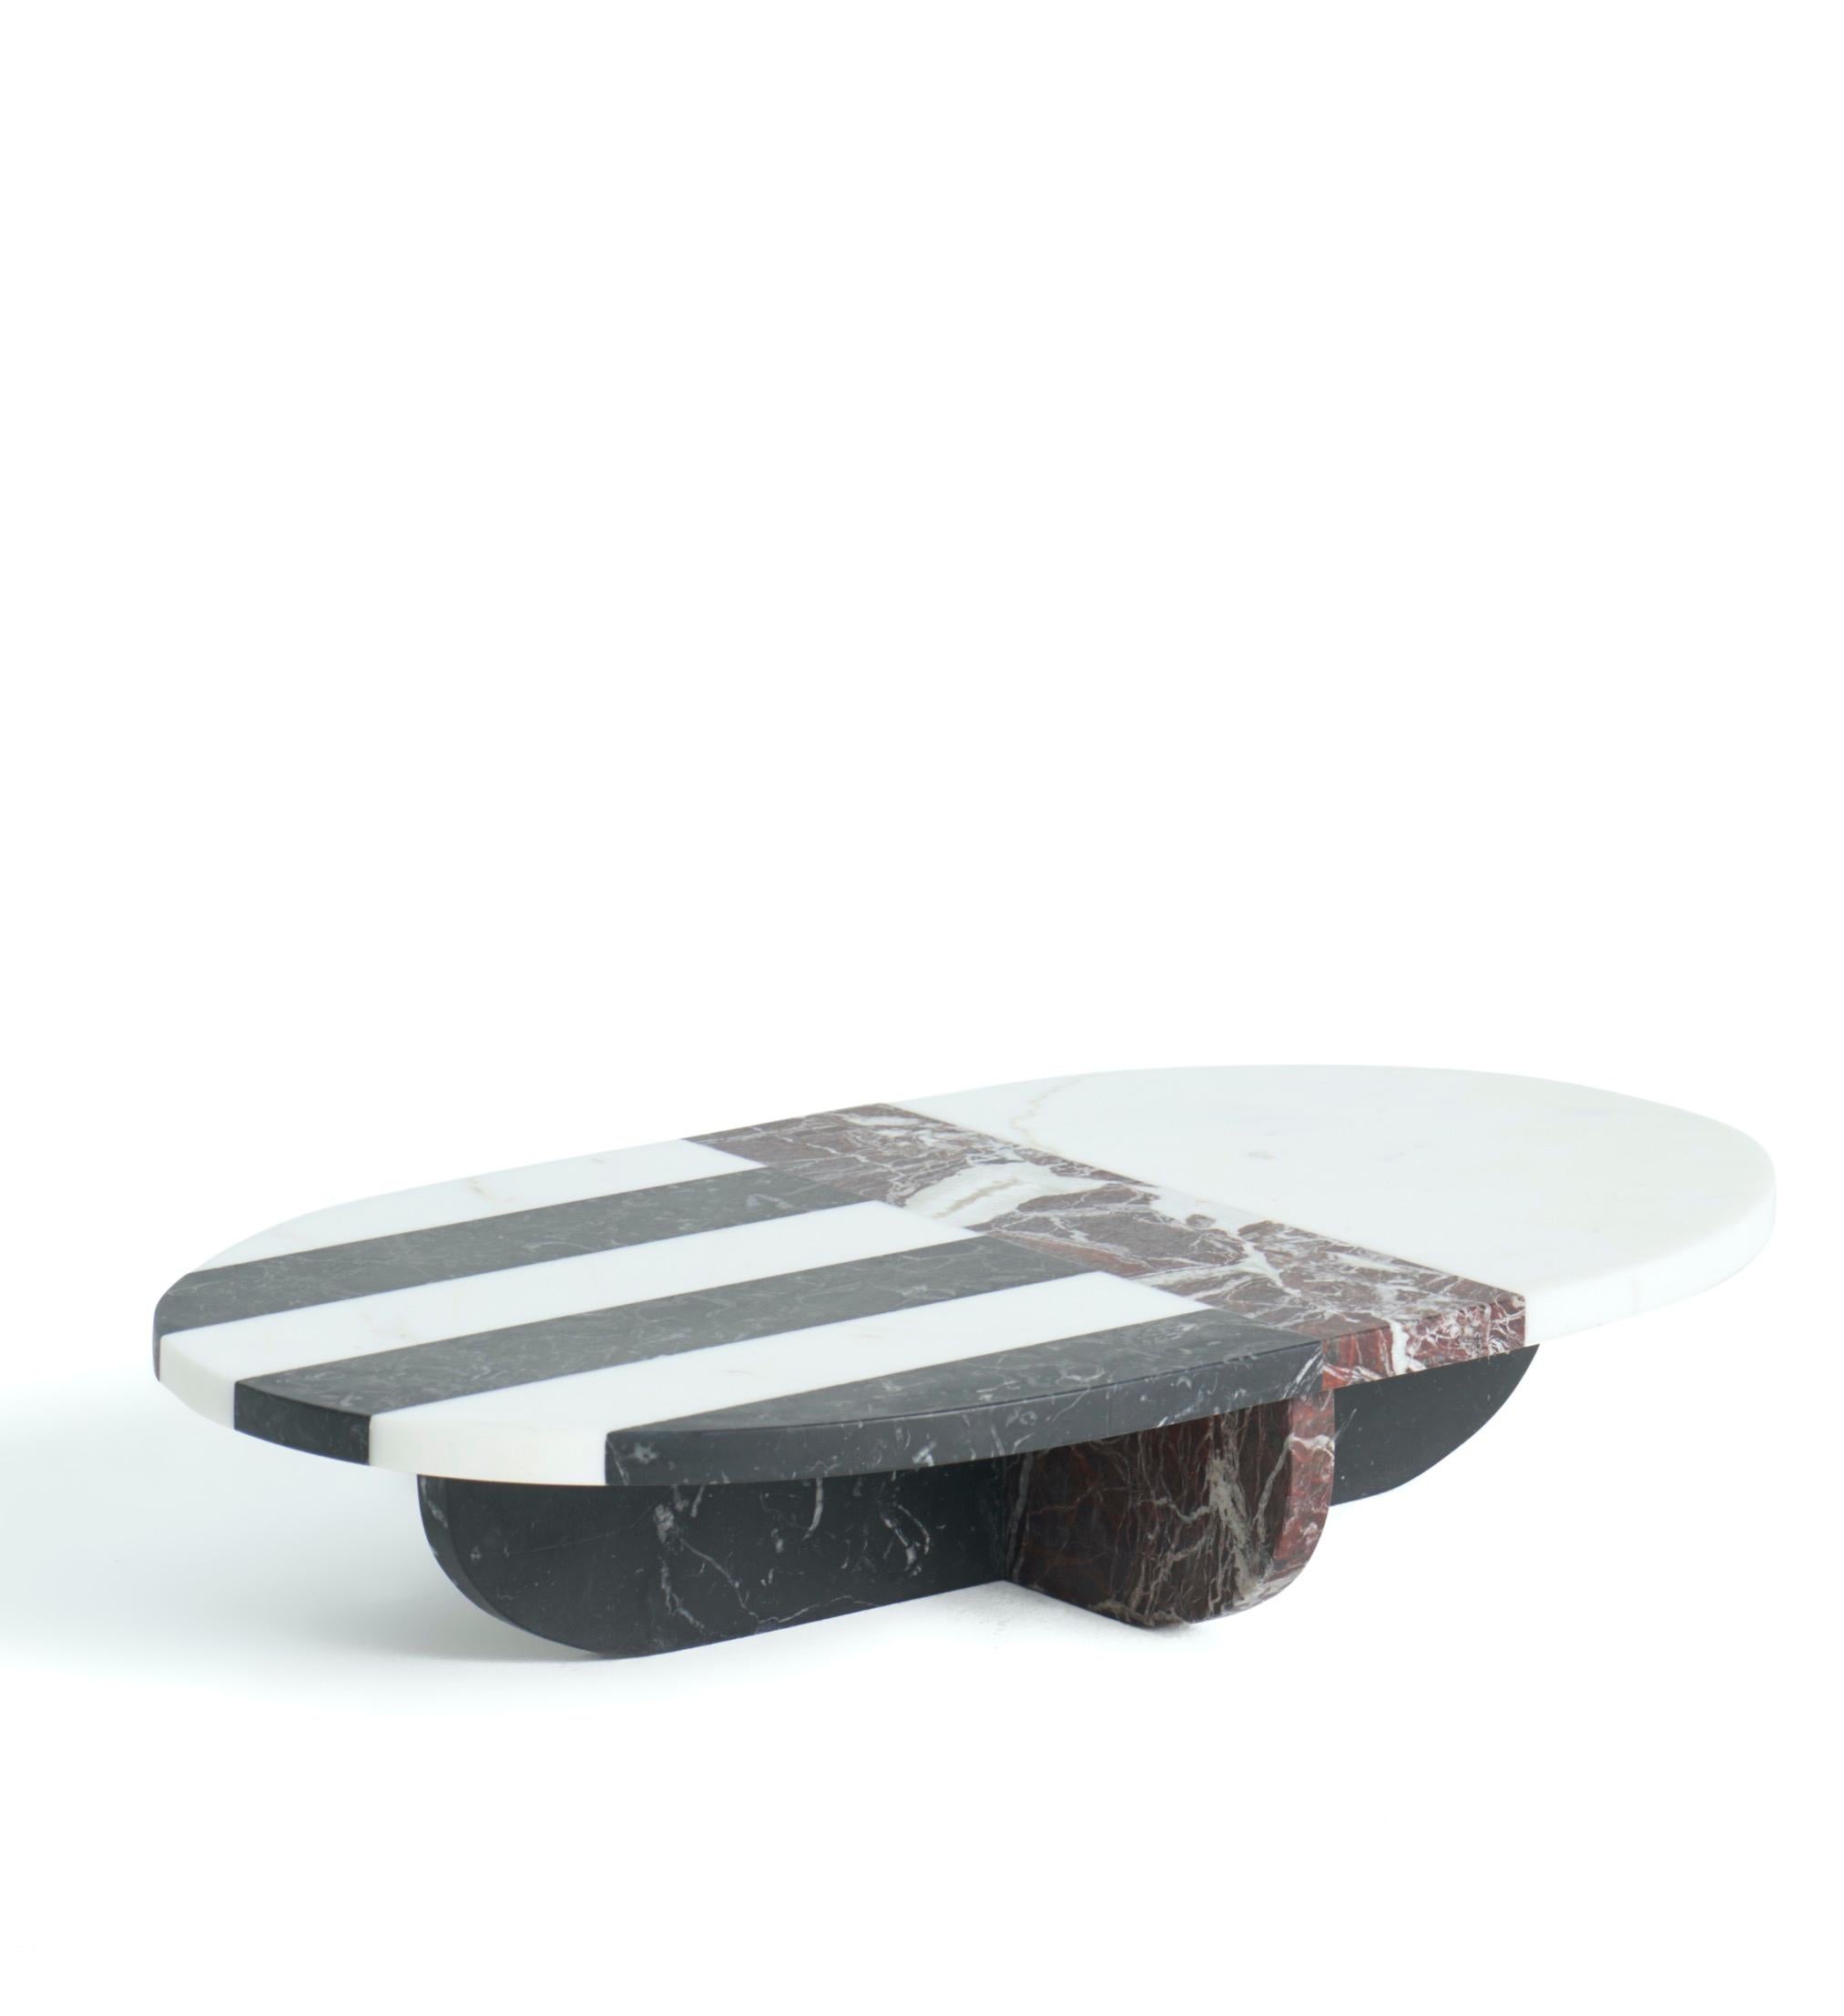 Artemisia marble centerpiece by Matteo Cibic
Dimensions: 23.6 x 13.8 x 4.7 cm
Materials:
Bianco
Michelangelo,
Rosso Levanto,
Nero Marquinia

Please note that the Cibic pieces with “ears” or tray handles are ornamental and not functional.